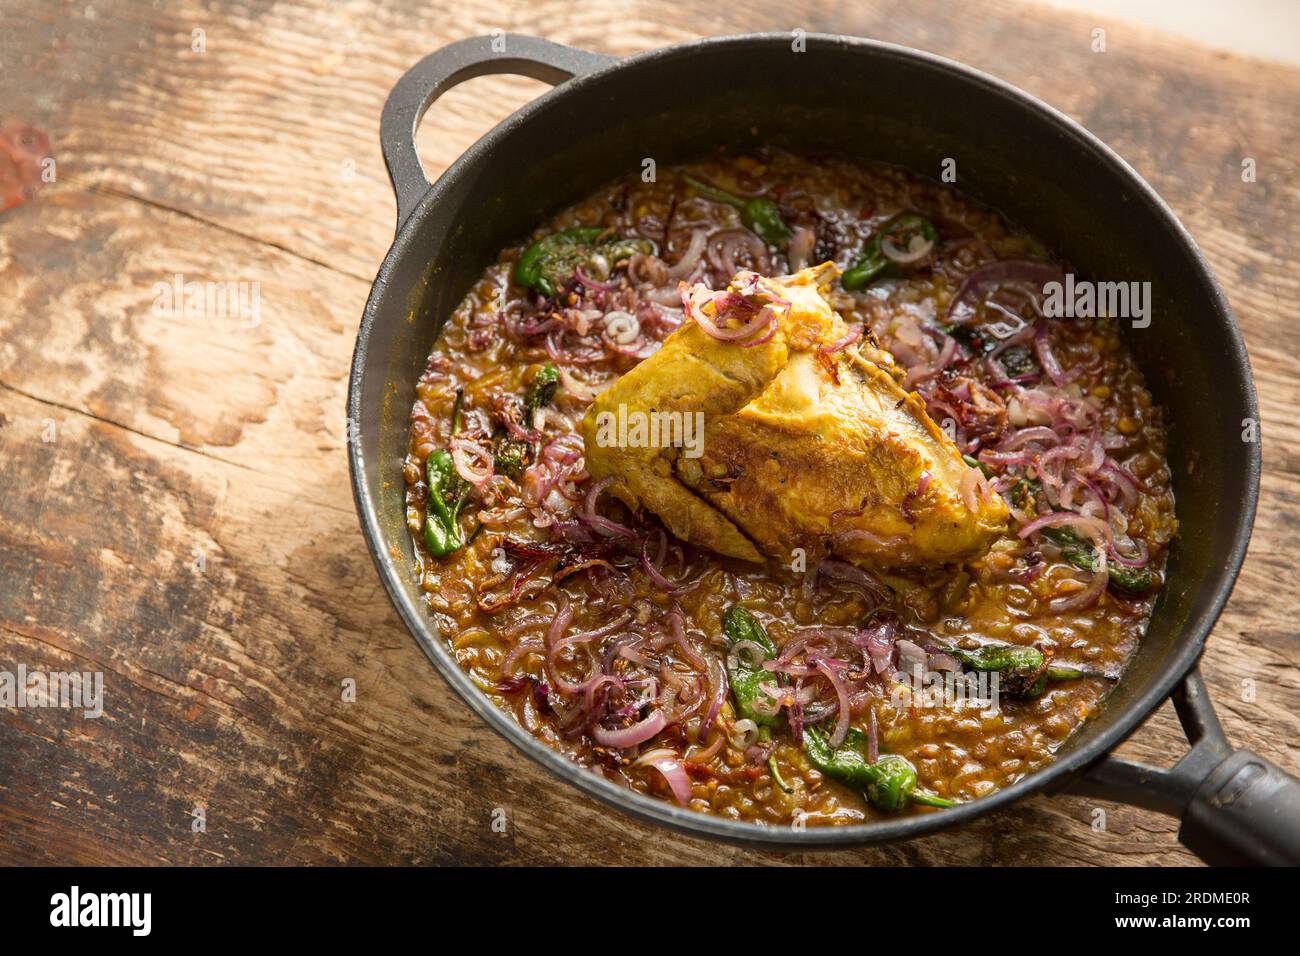 A chicken fillet and wing on the bone that have been homecooked and curried with brown lentils to make a chicken dal. England UK GB Stock Photo